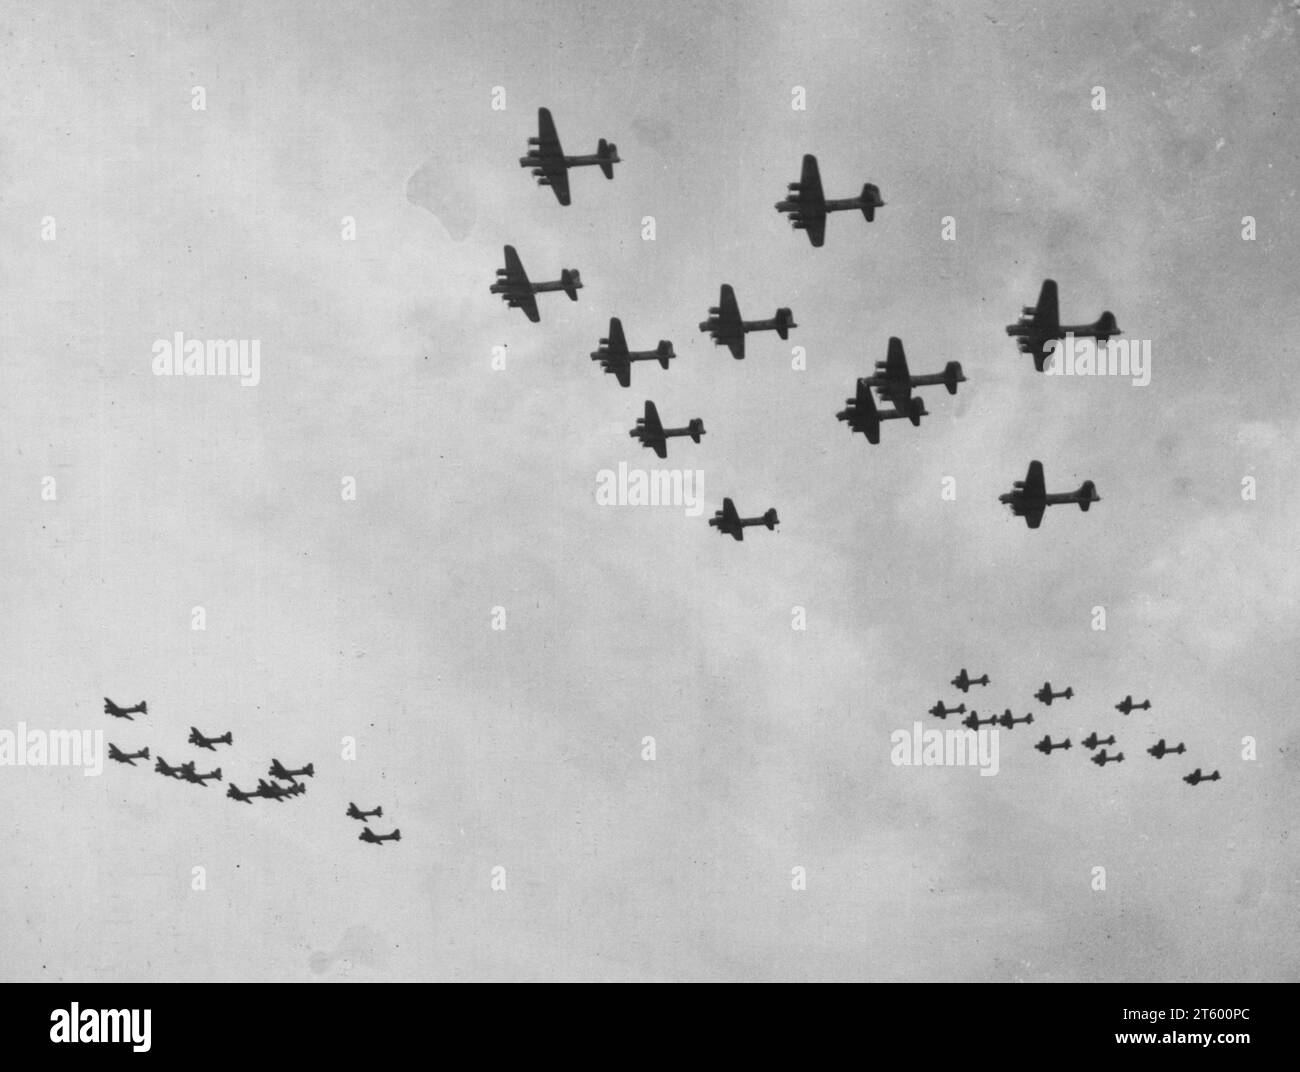 A Large Formation Of 401St Bomb Group Boeing B-17 "Flying Fortresses"Heads For Home Base In England After Bombing Enemy Installations At Dresden, Germany On 23 April 1945 Stock Photo